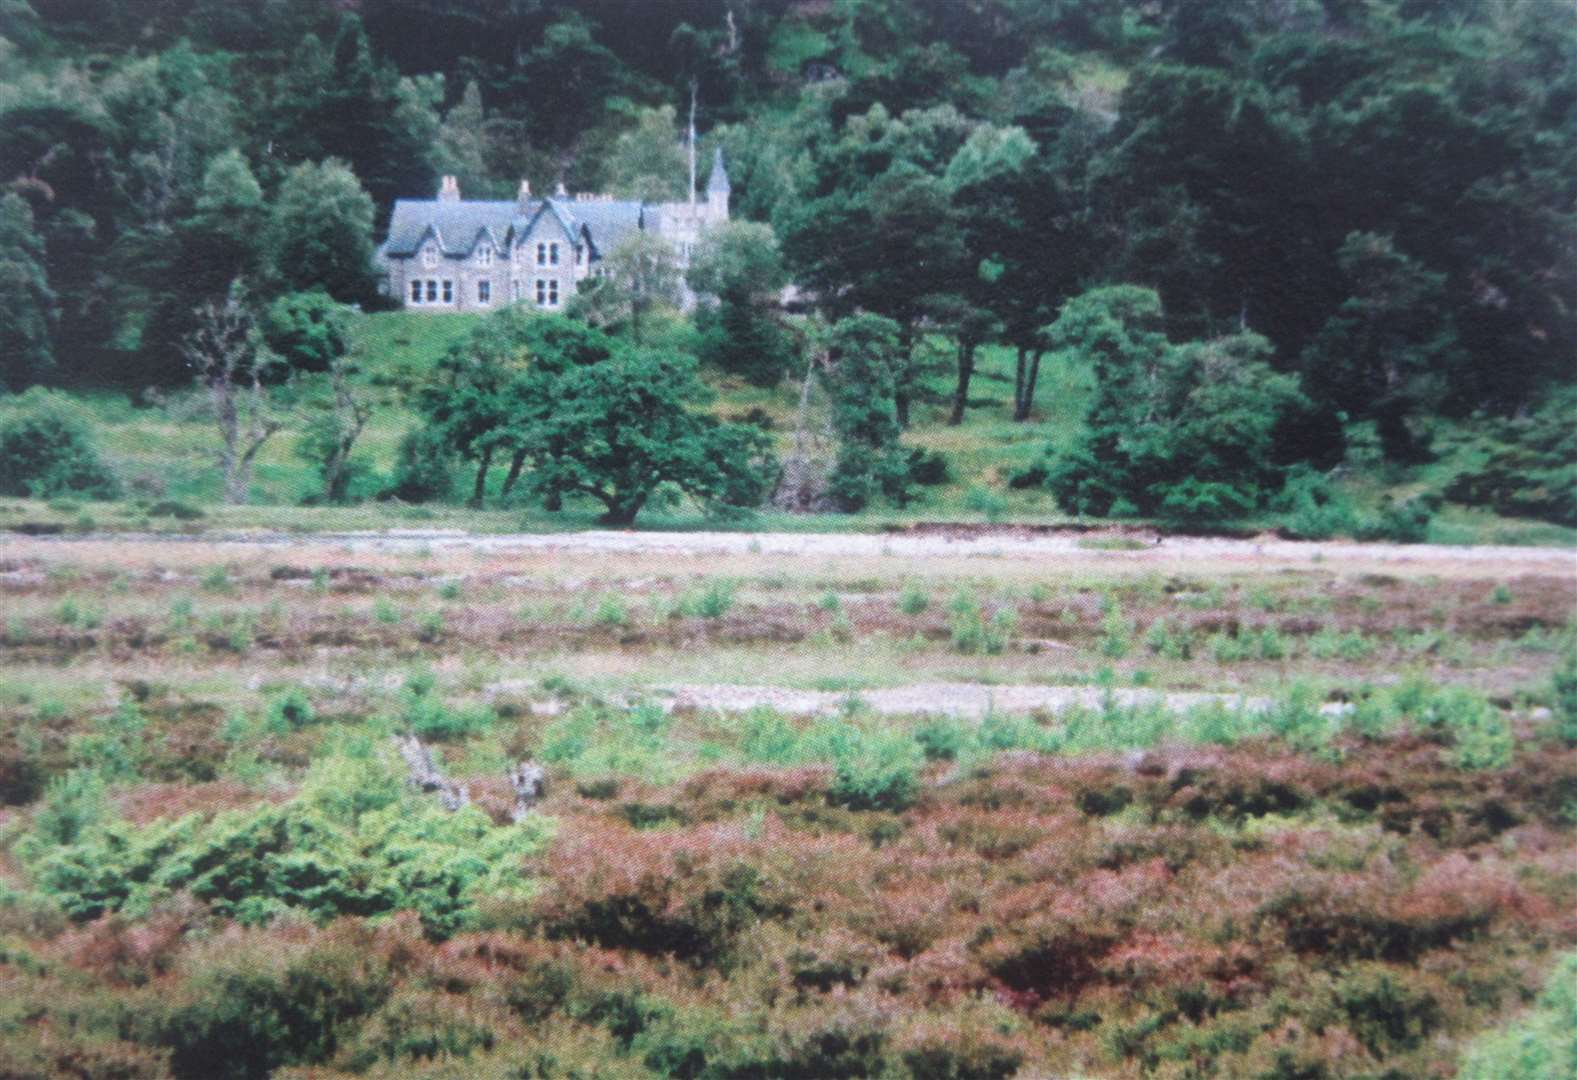 Scottish home: Glenfeshie Lodge in the early days of the Povlsen era